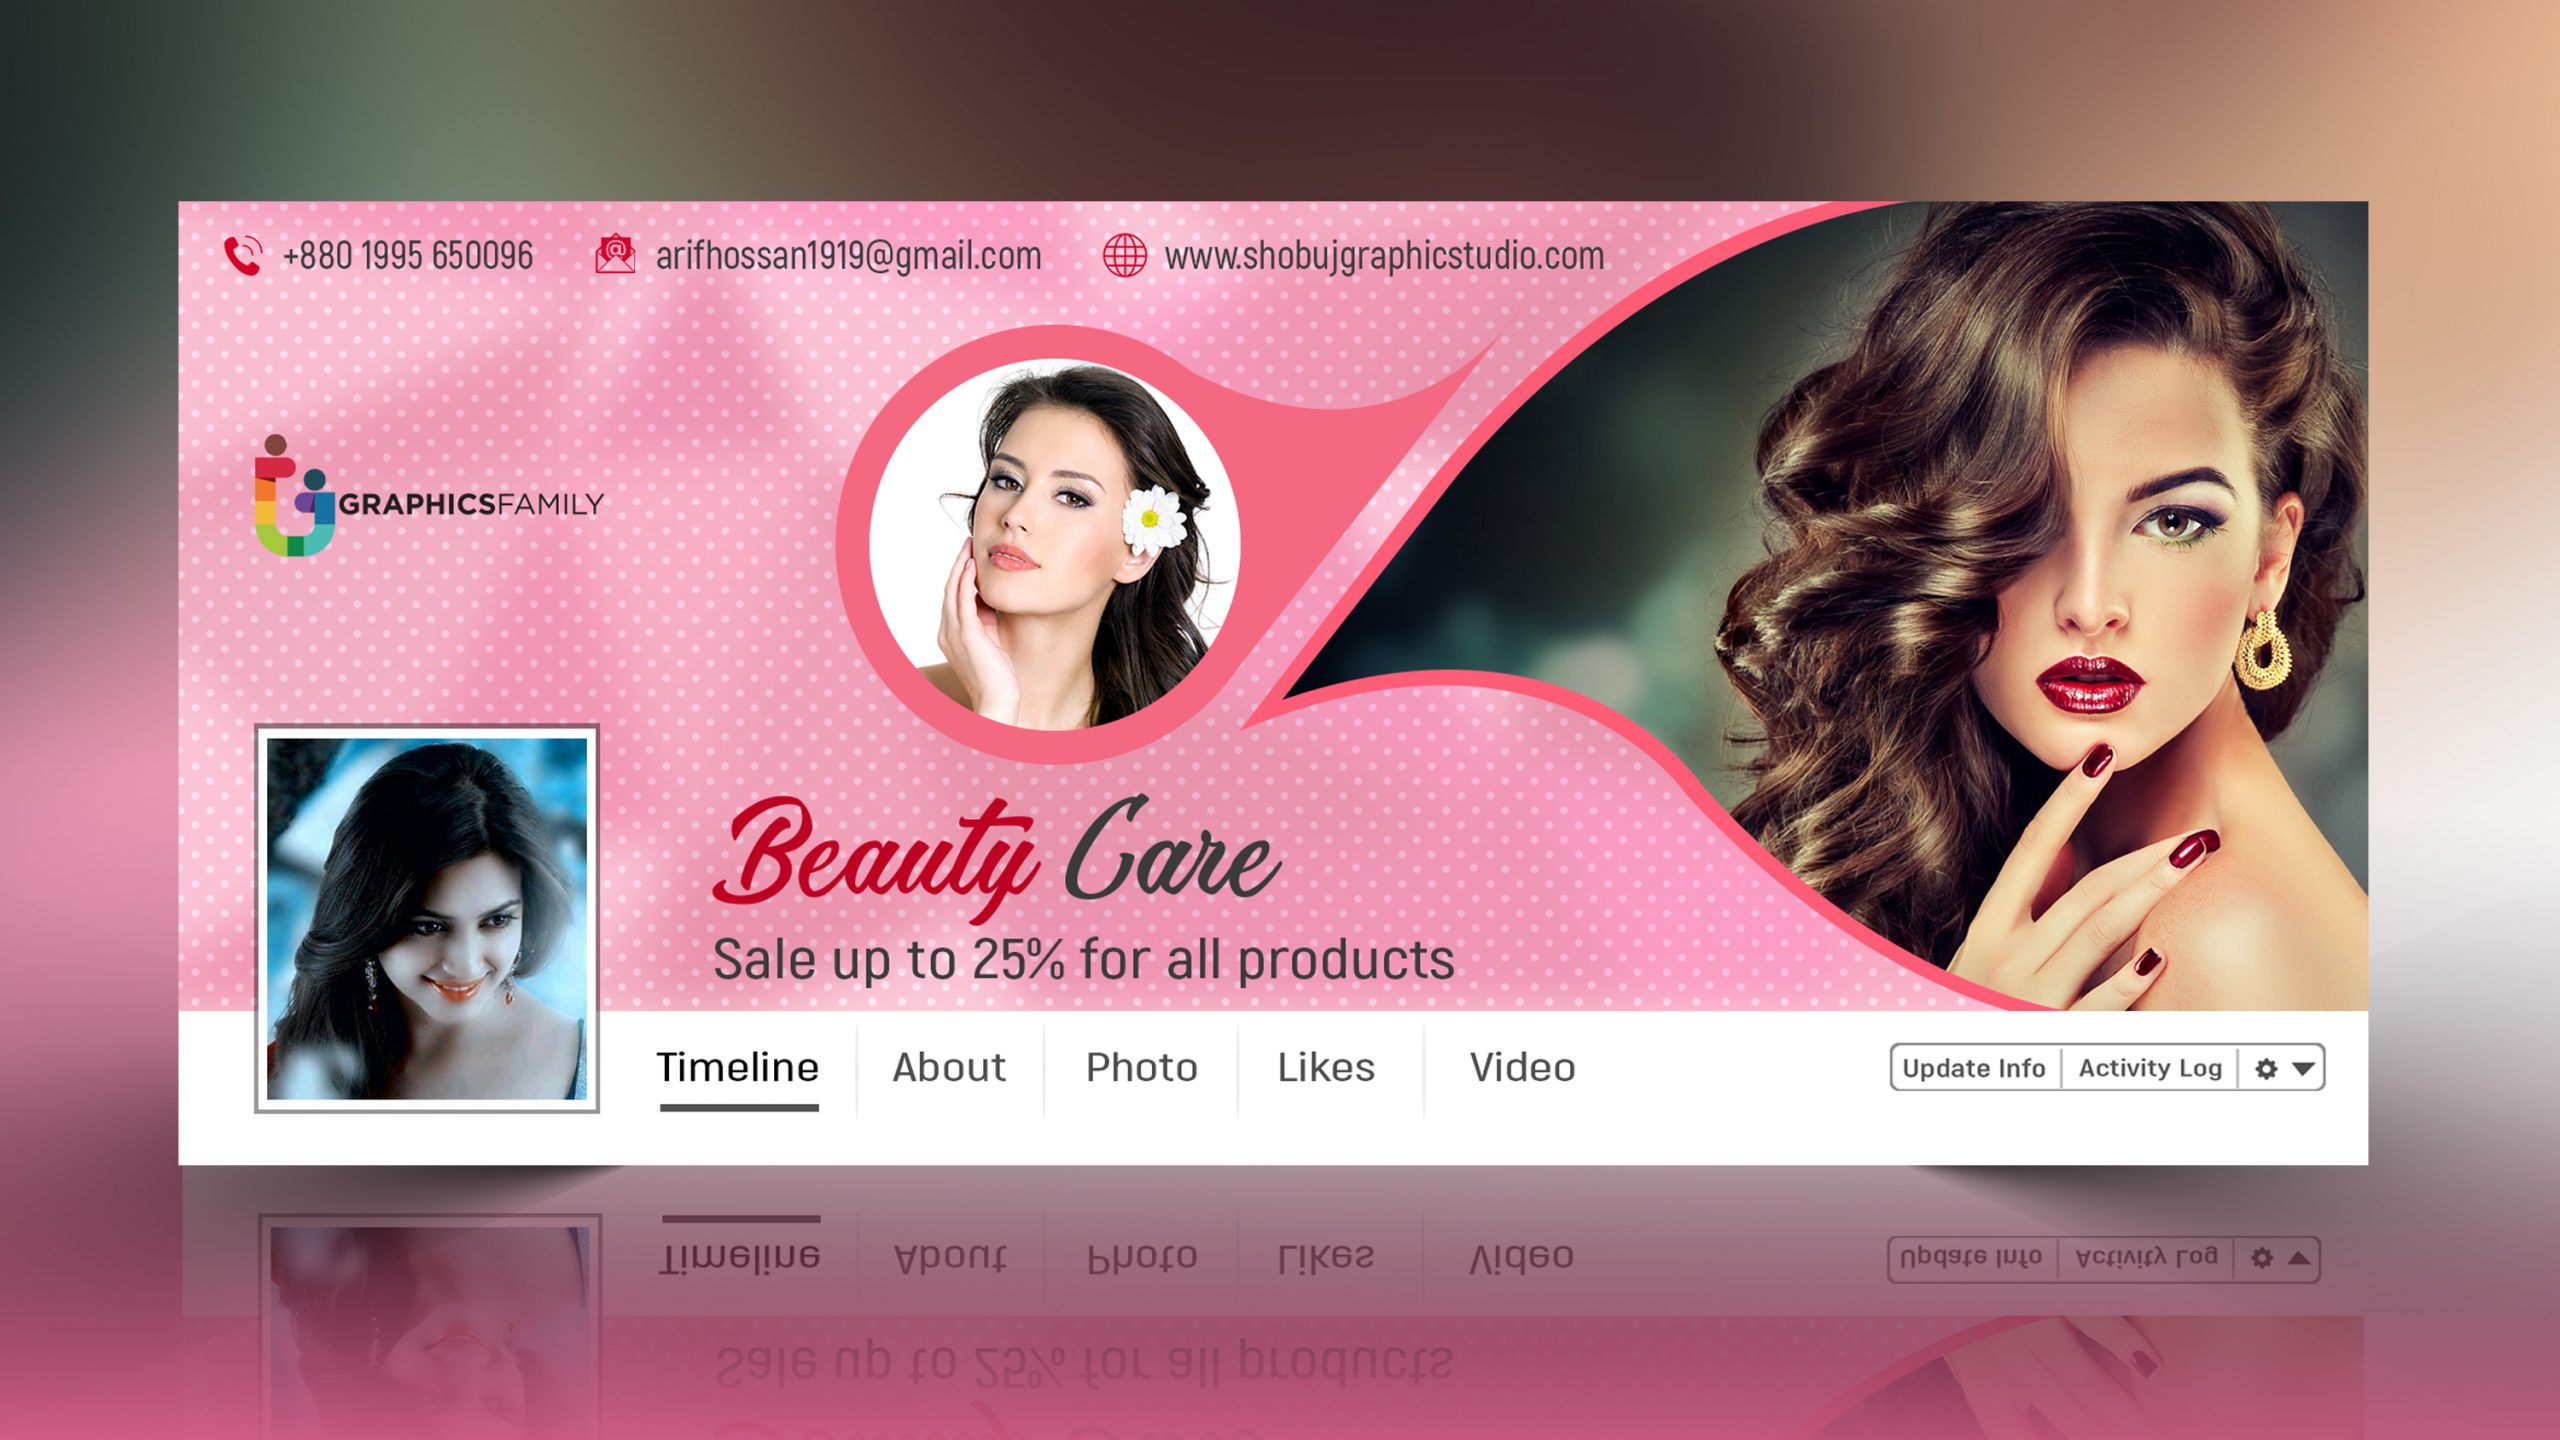 Beauty Care Facebook Cover Design psd Download – GraphicsFamily